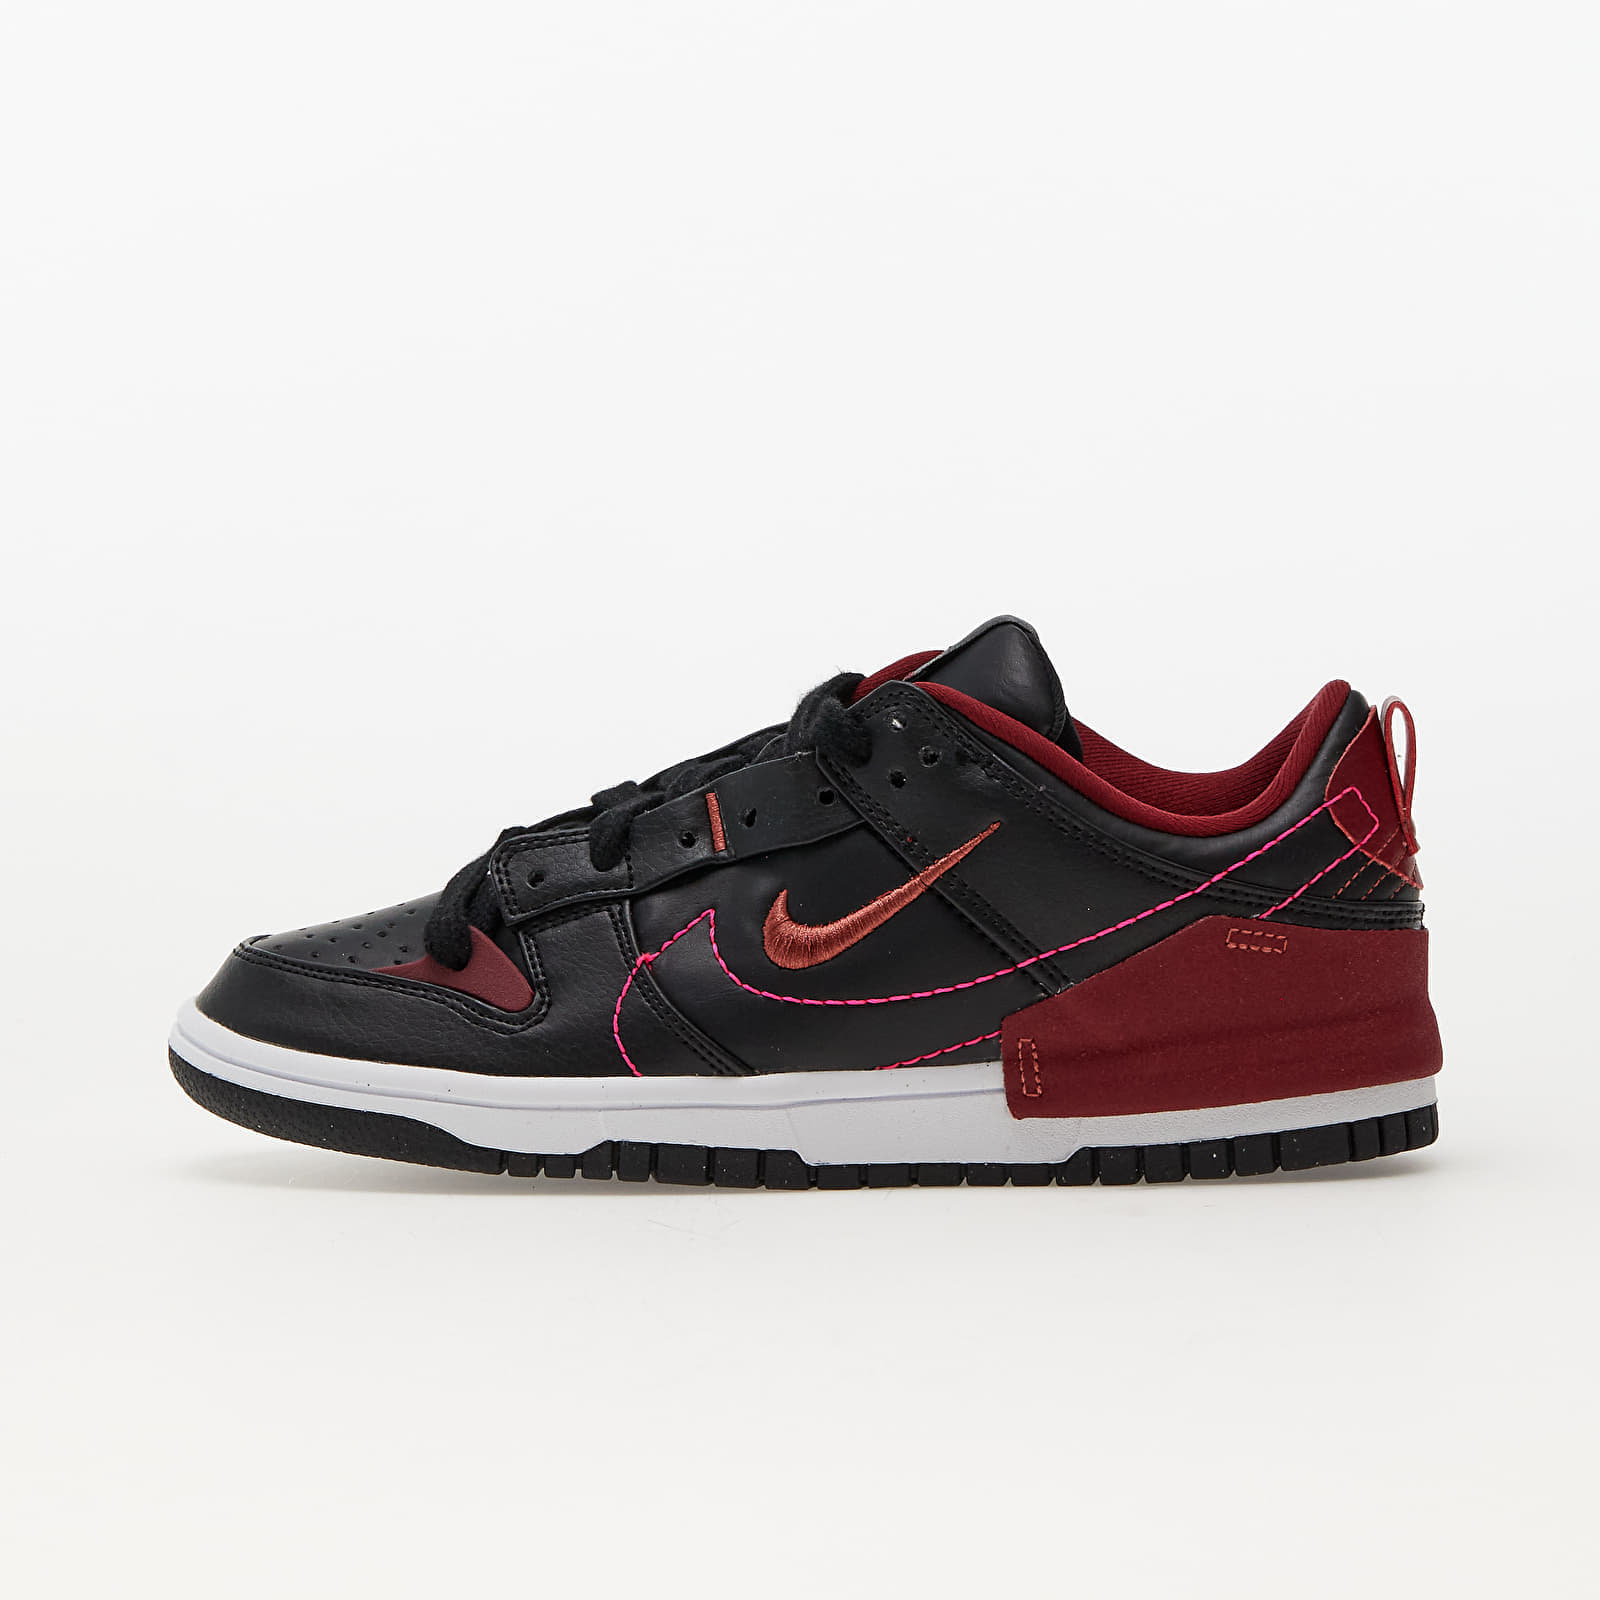 Baskets et chaussures pour femmes Nike W Dunk Low Disrupt 2 Black/ Canyon Rust-Team Red-Hyper Pink